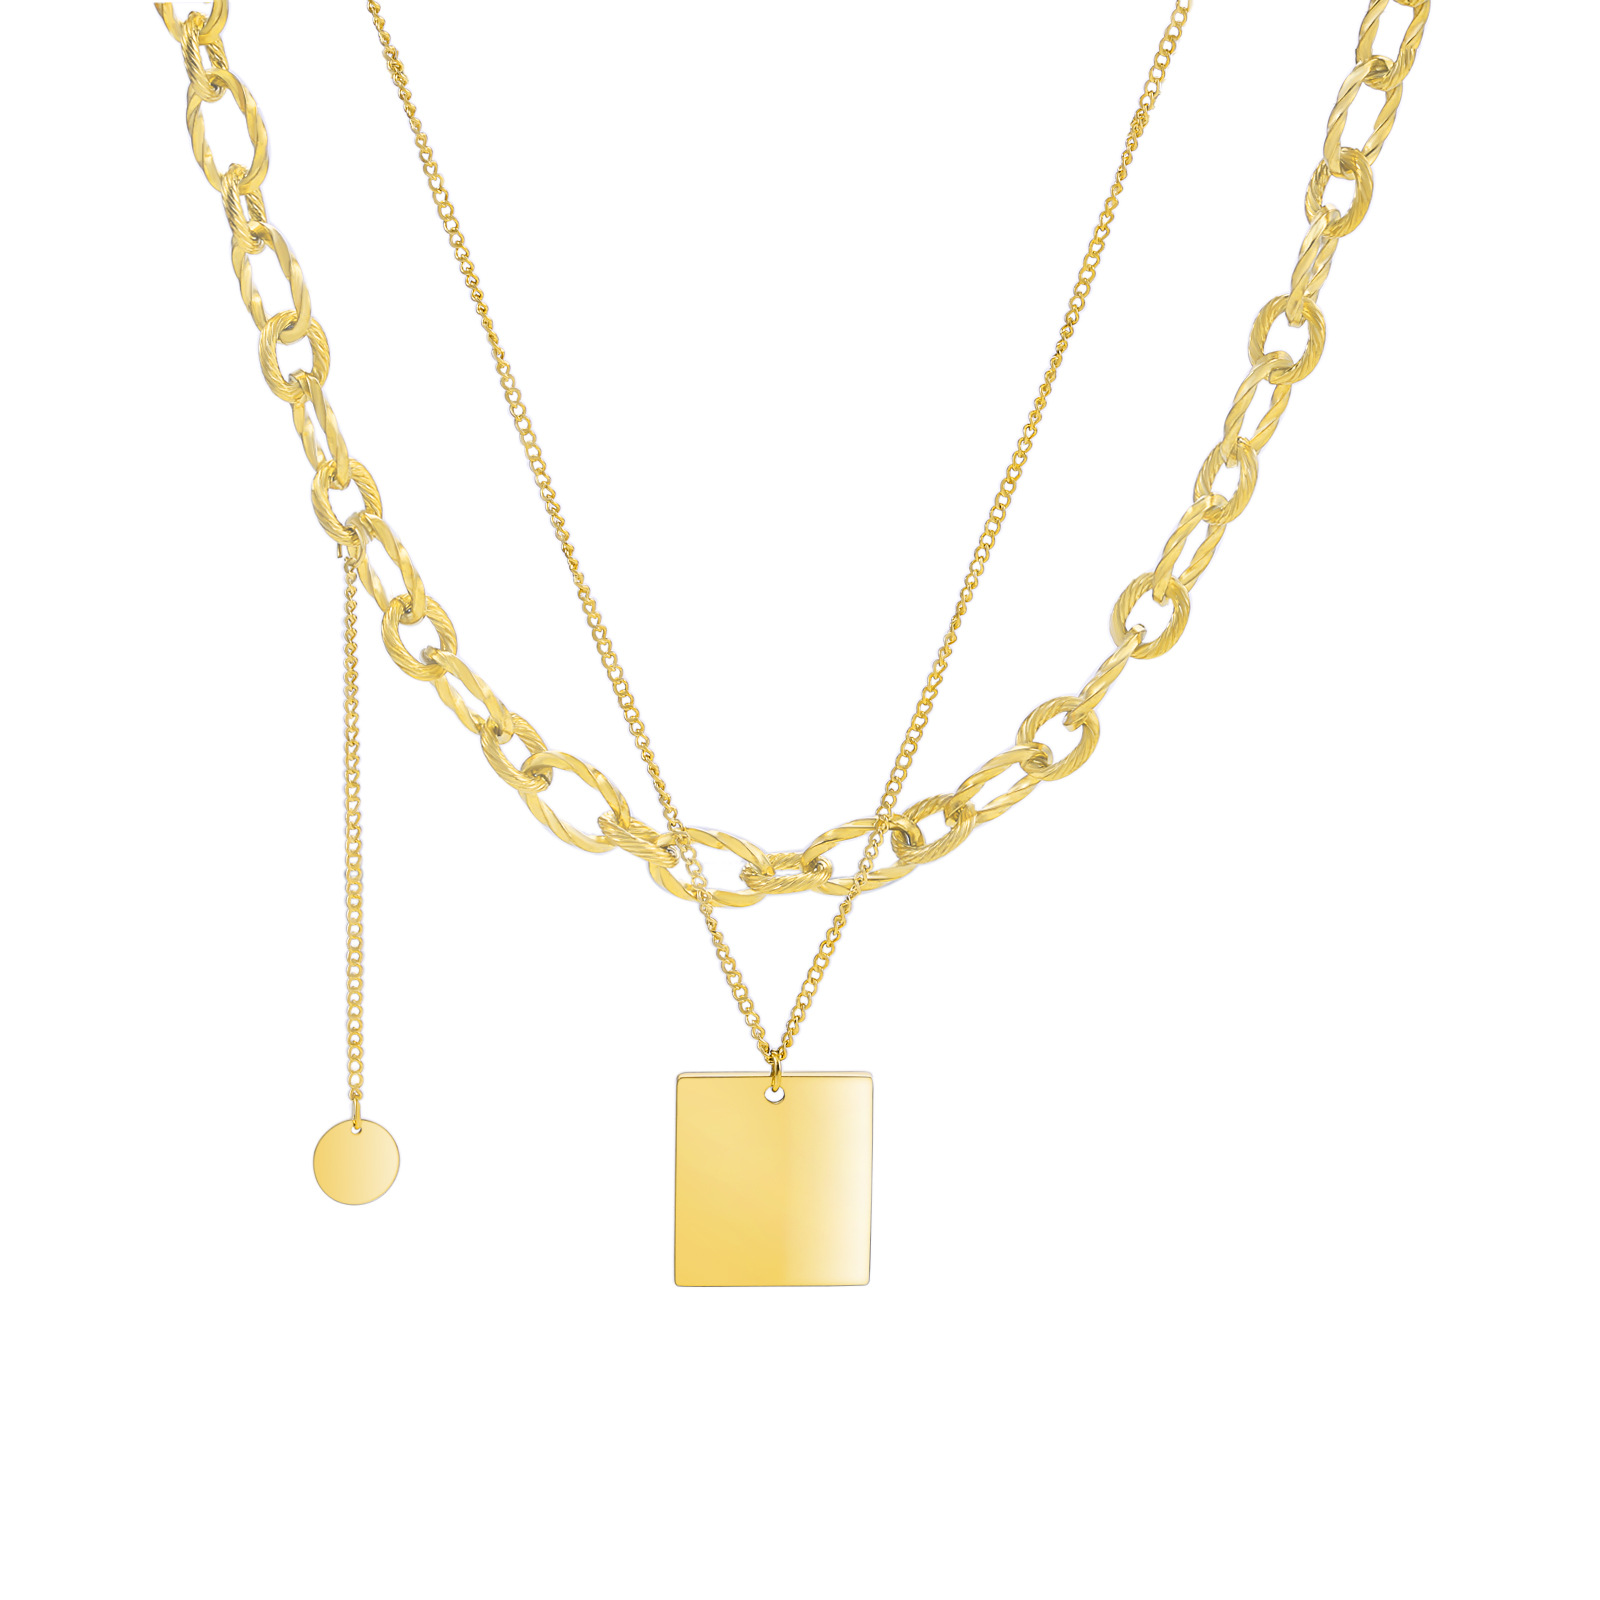 1:Square Double Layer Necklace